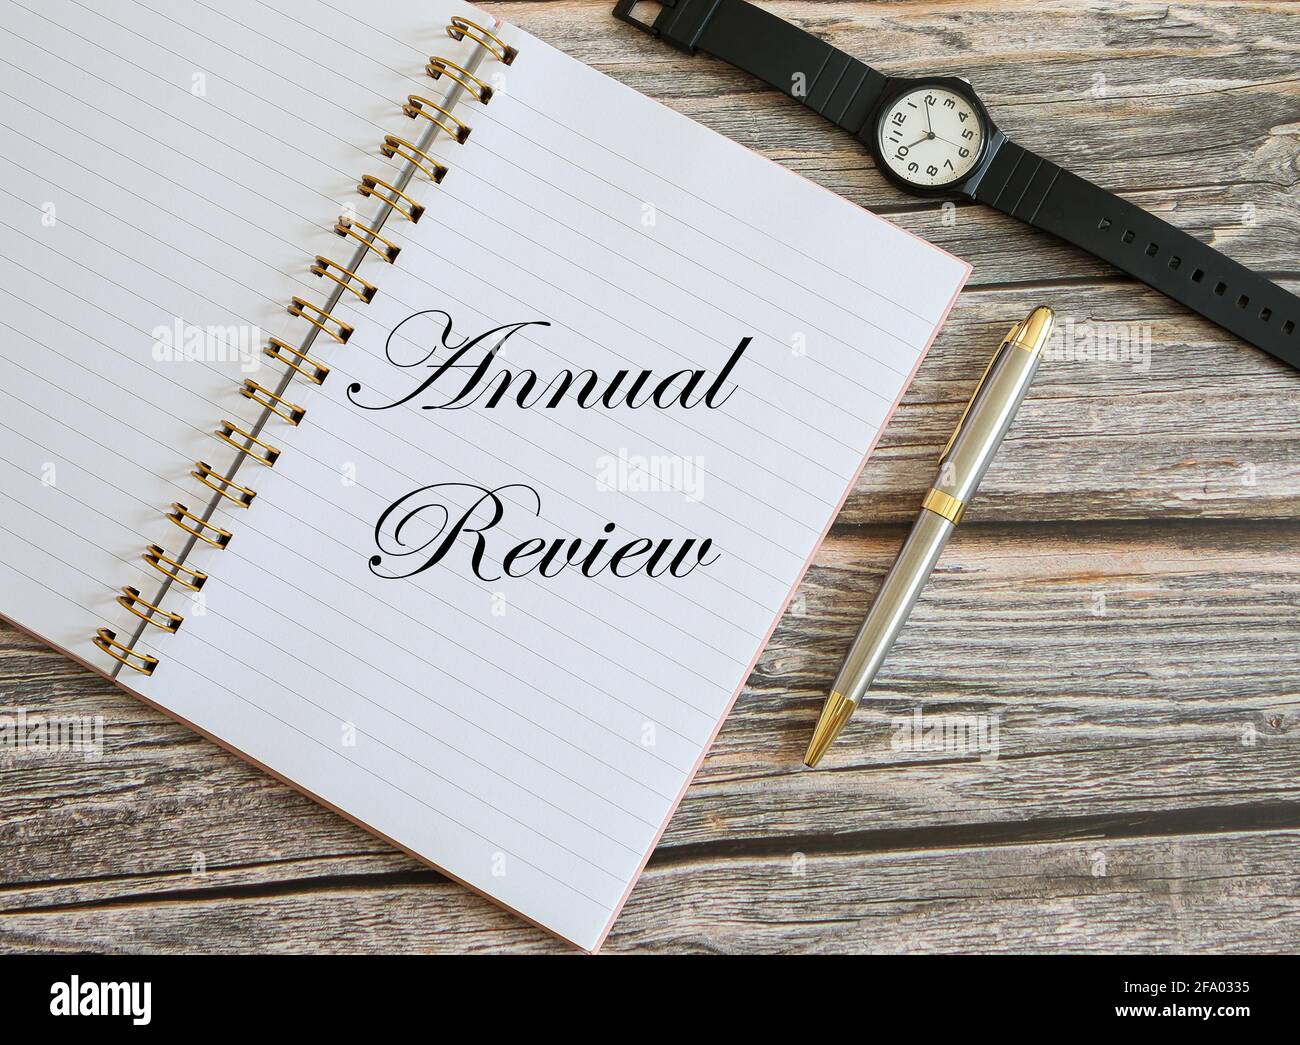 Top view of notebook, pen and watch on wooden background with a text Annual Review written in the notebook. Business and financial concept Stock Photo